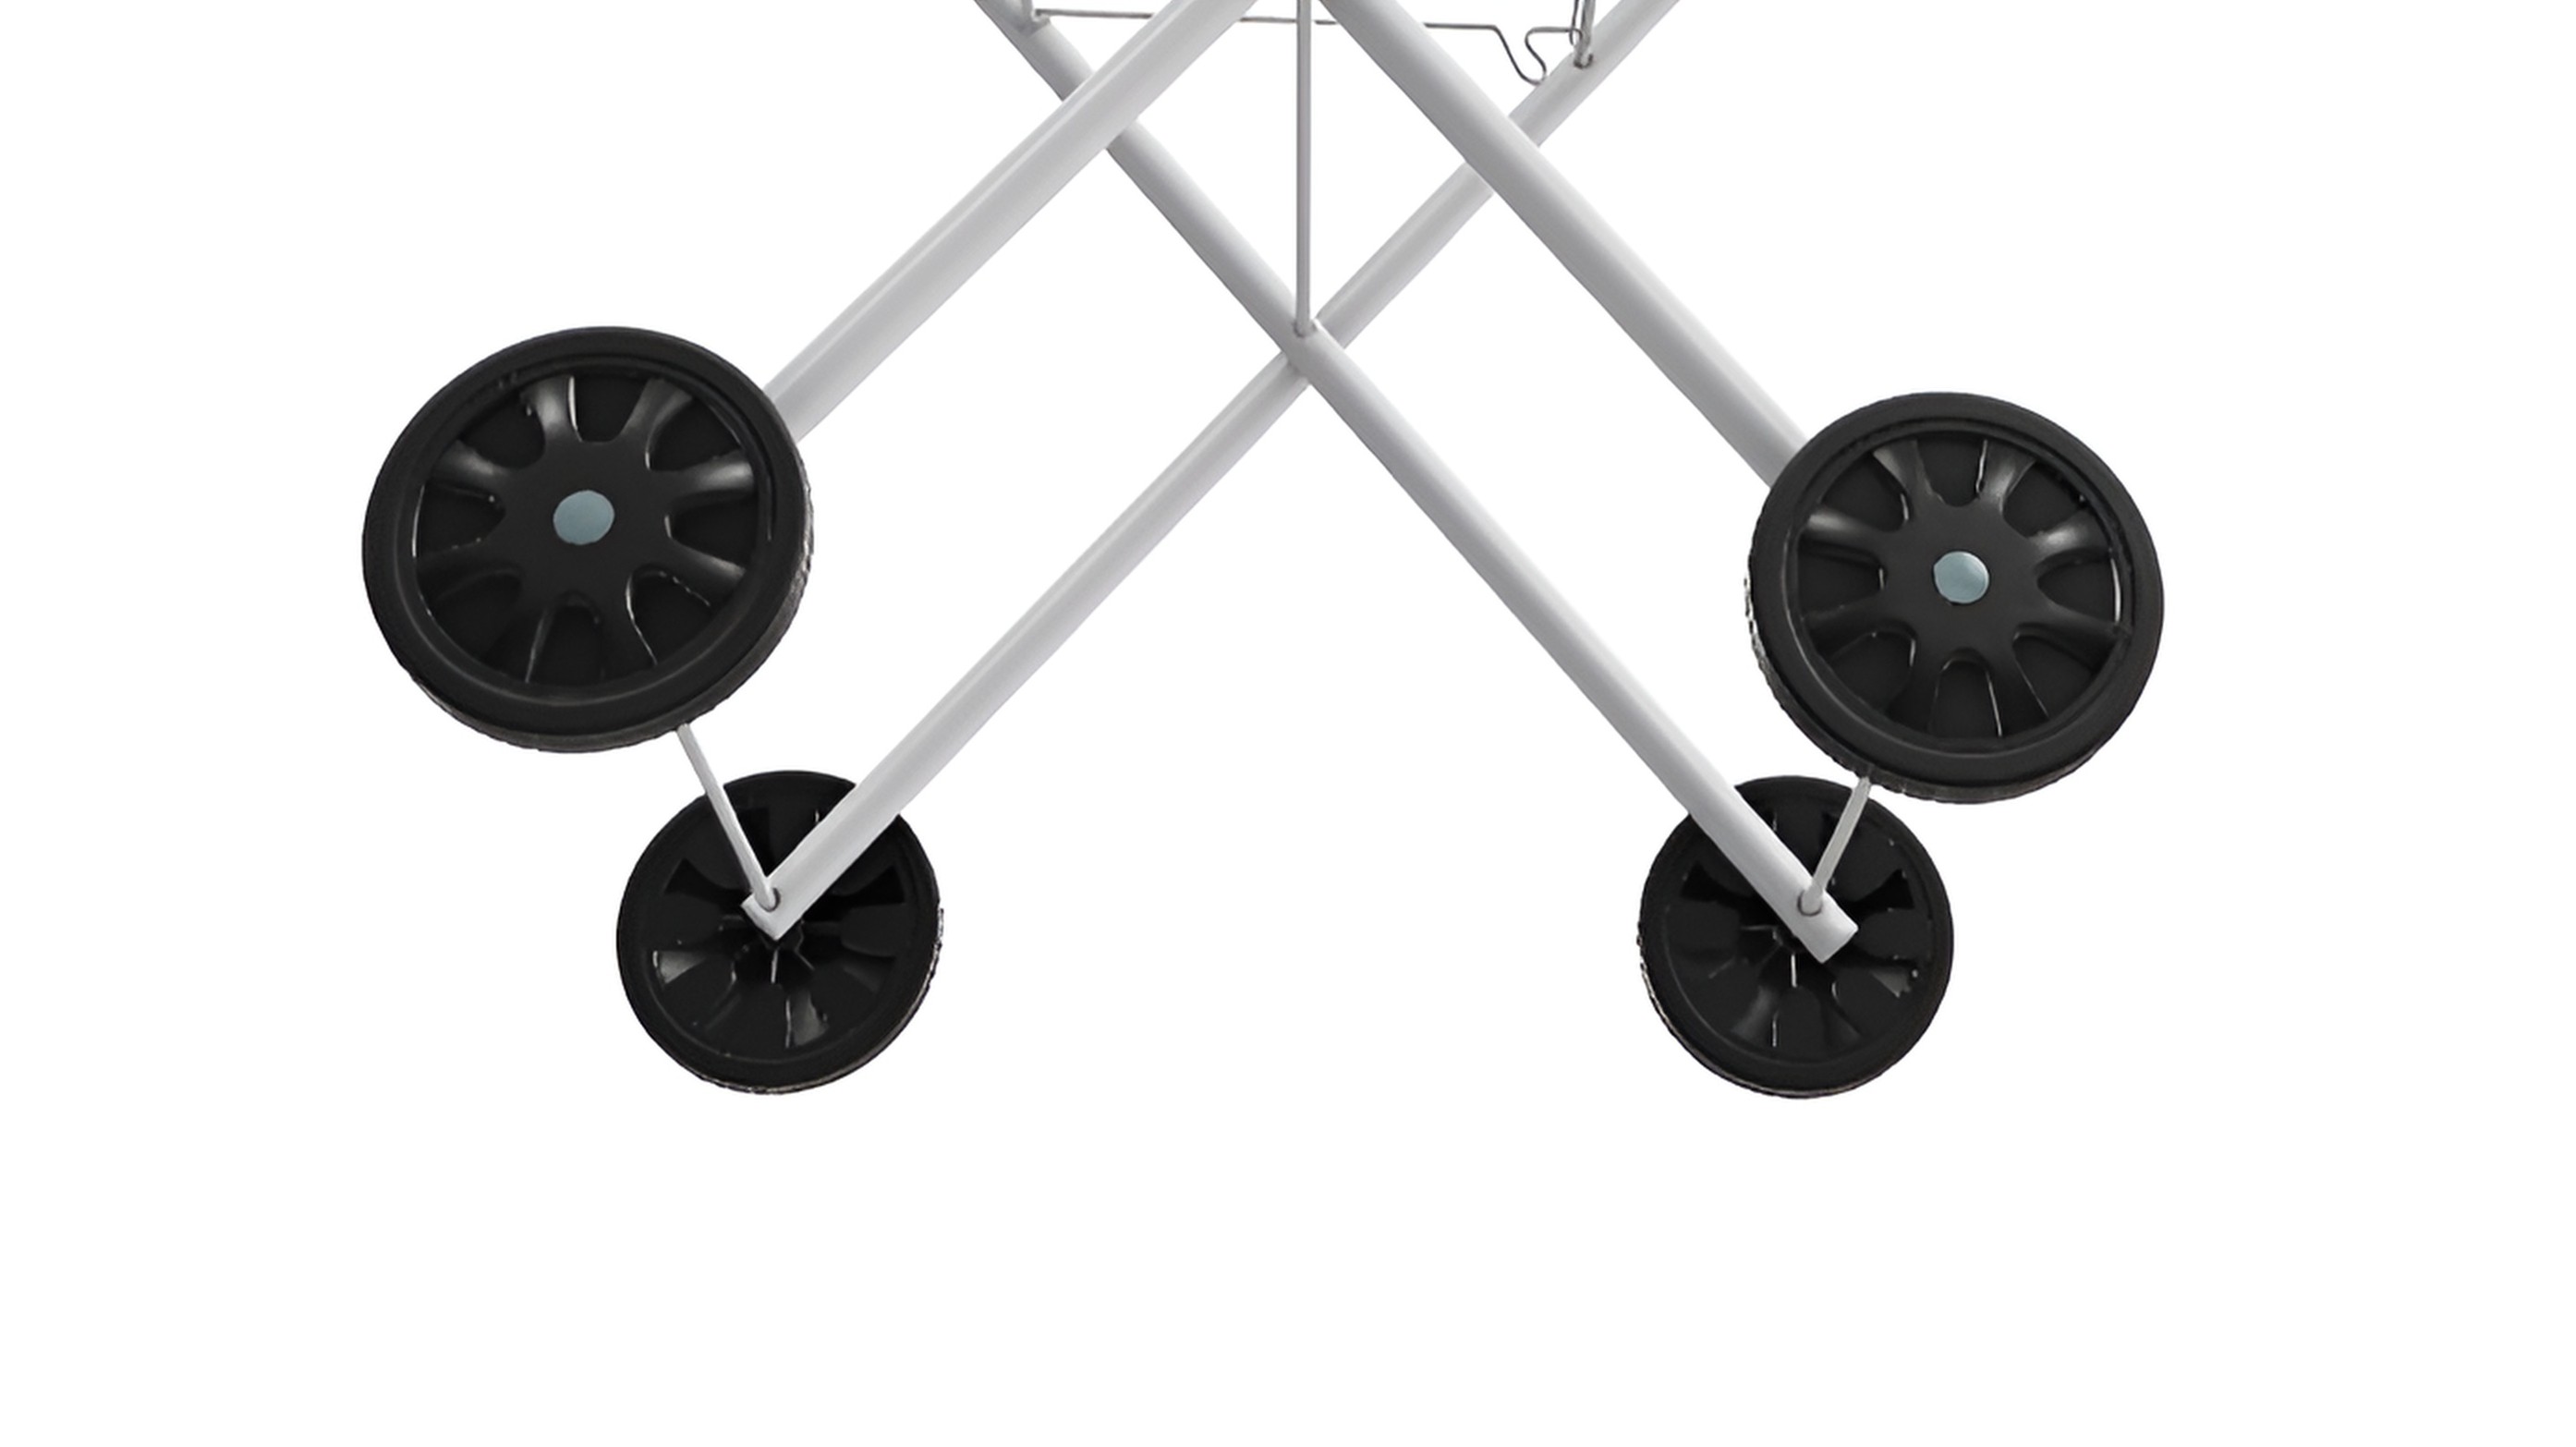 Laundry Basket Trolley Ease of Use